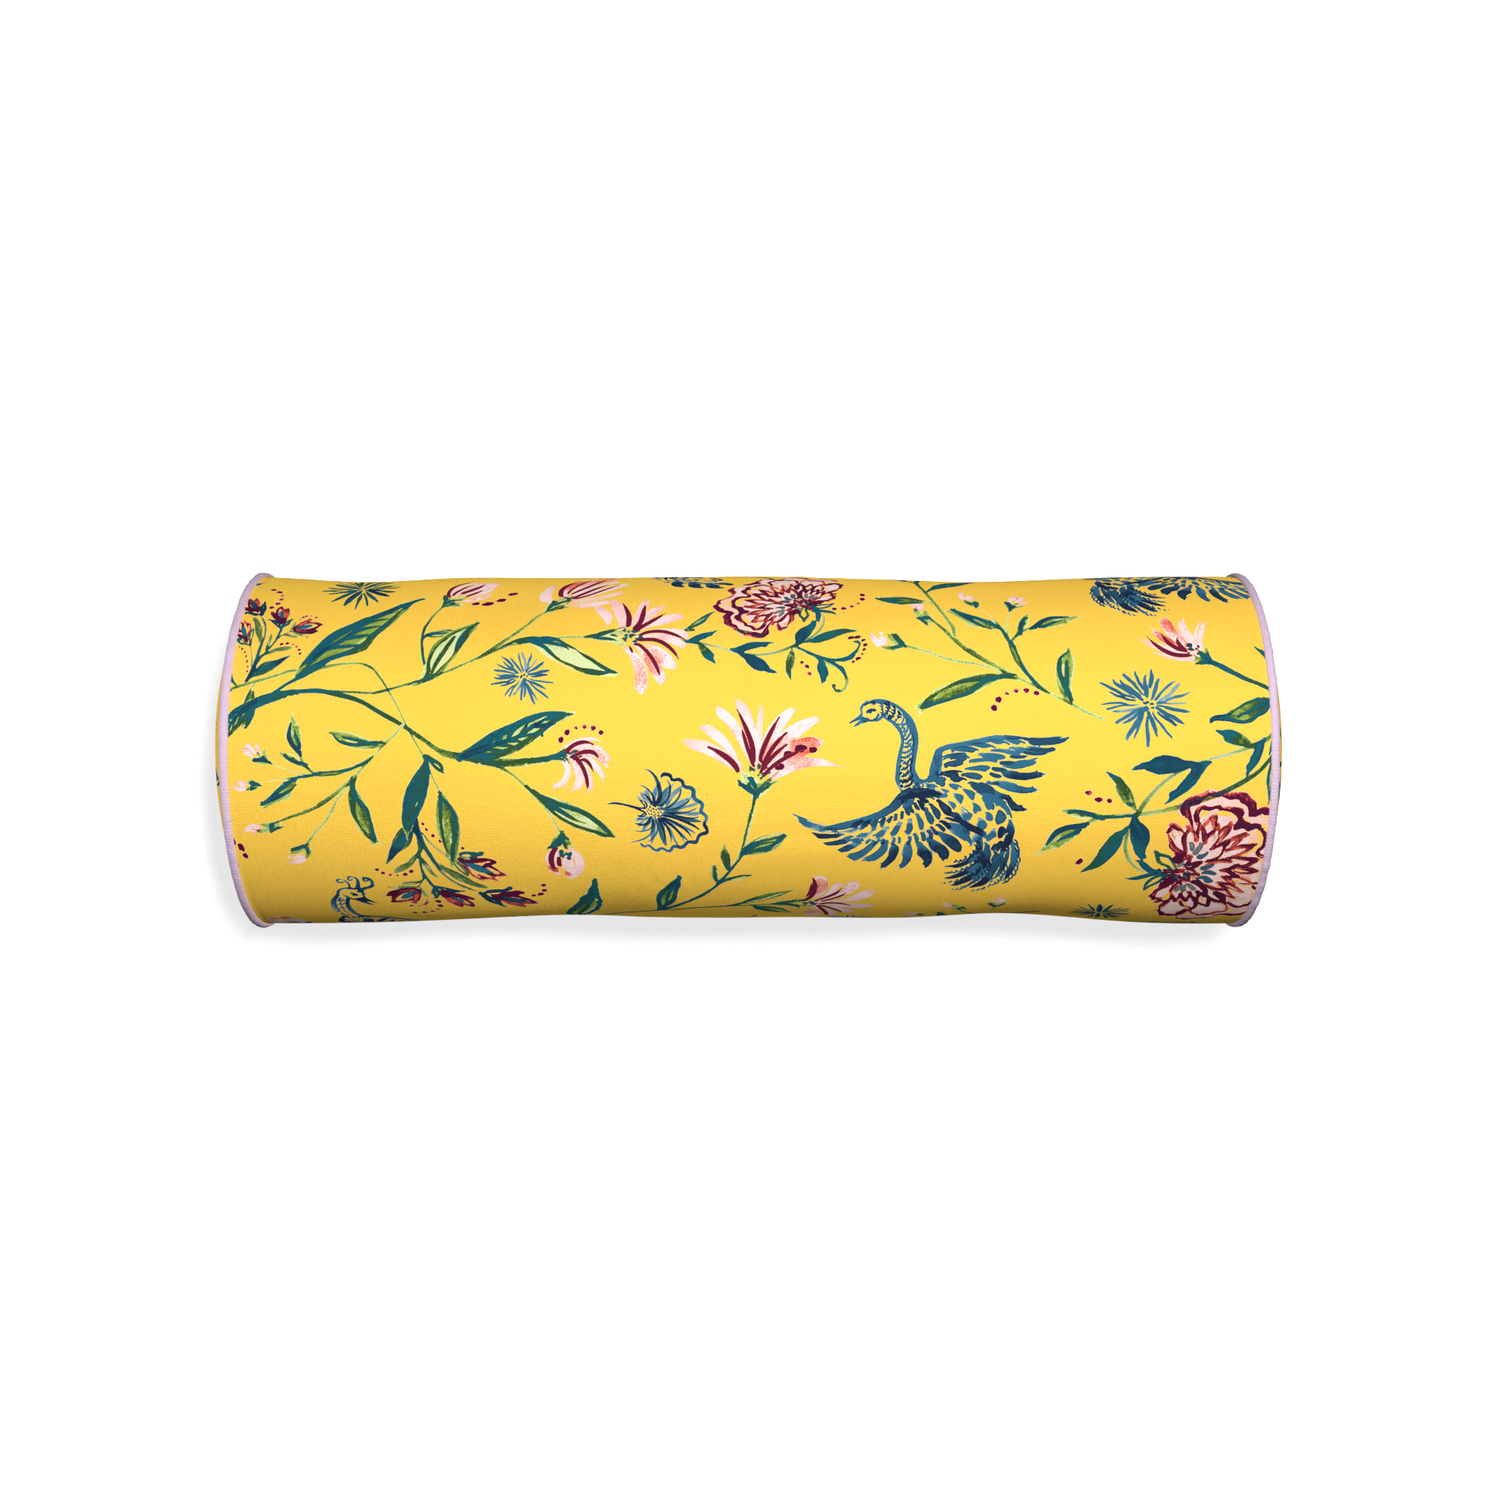 Bolster daphne canary custom pillow with l piping on white background